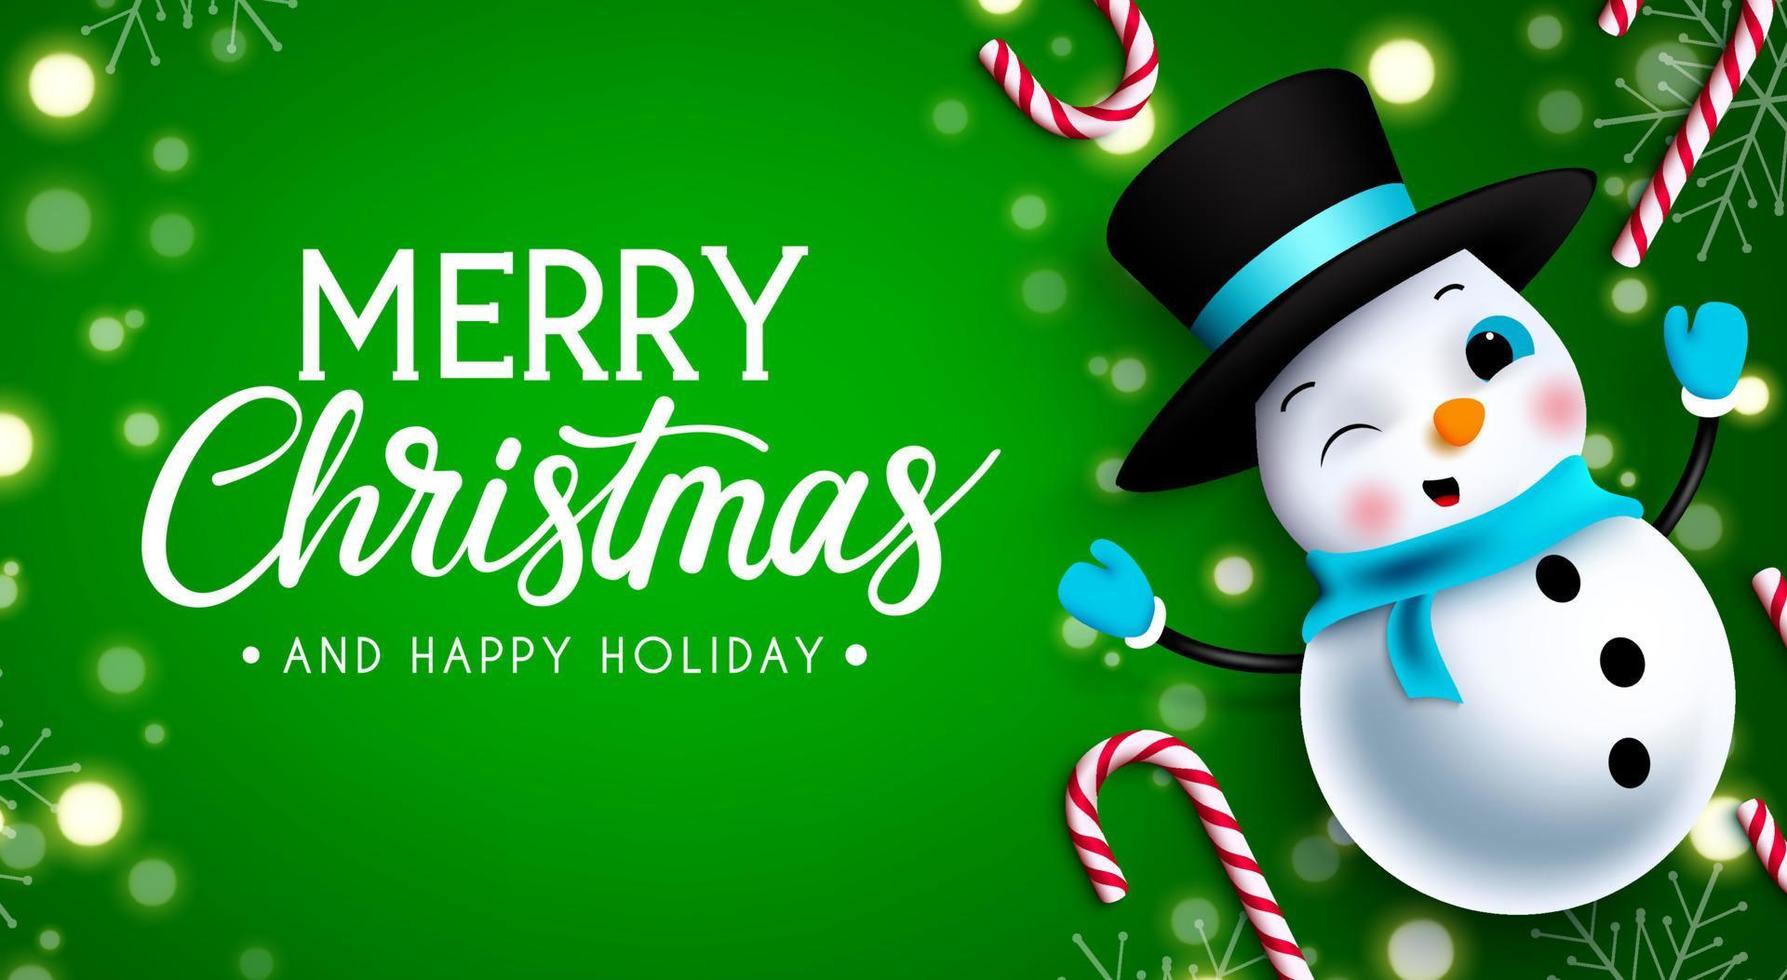 Christmas snowman vector design. Merry christmas greeting text with snow man character with friendly expression for xmas season card and decoration. Vector illustration.